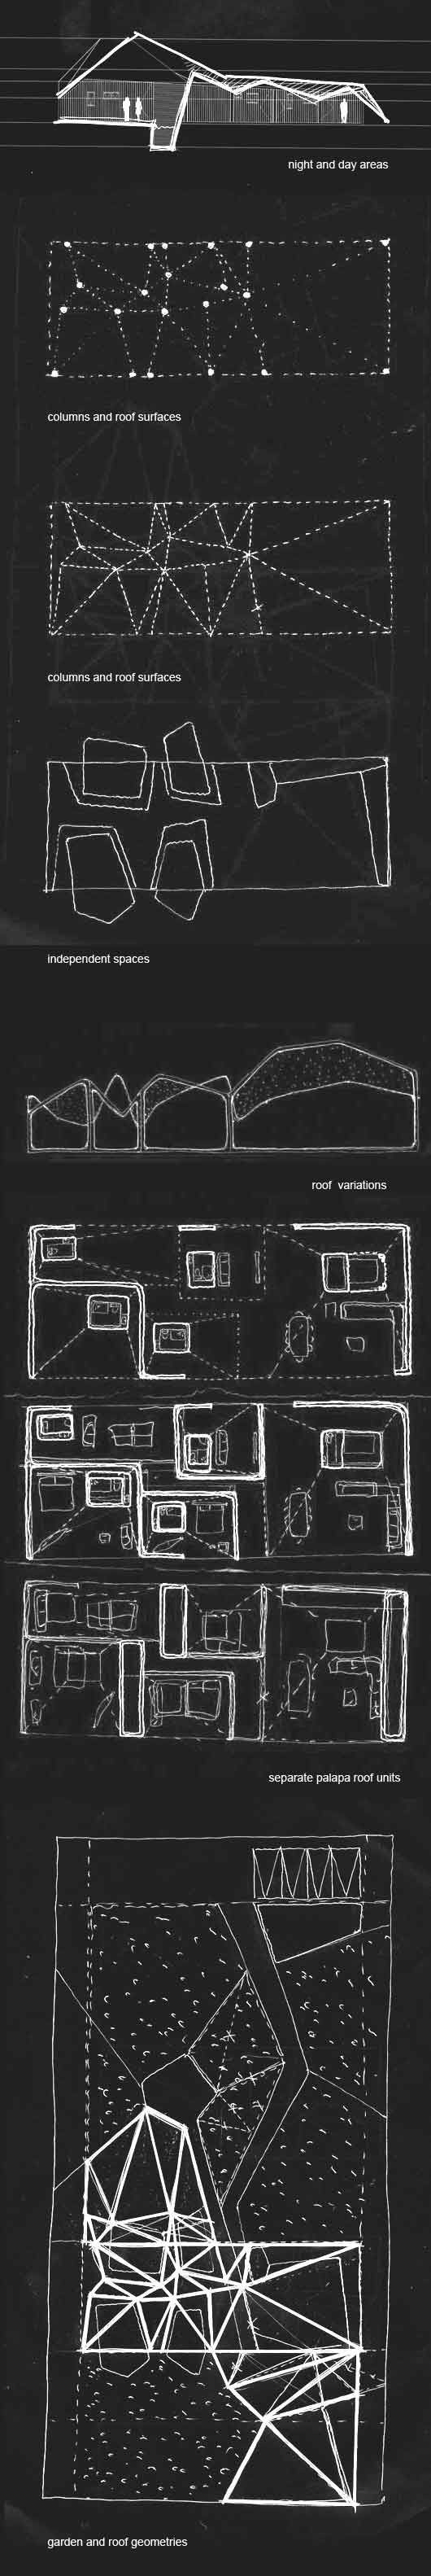 Casa Musso Conceptual drawings - first proposals |...